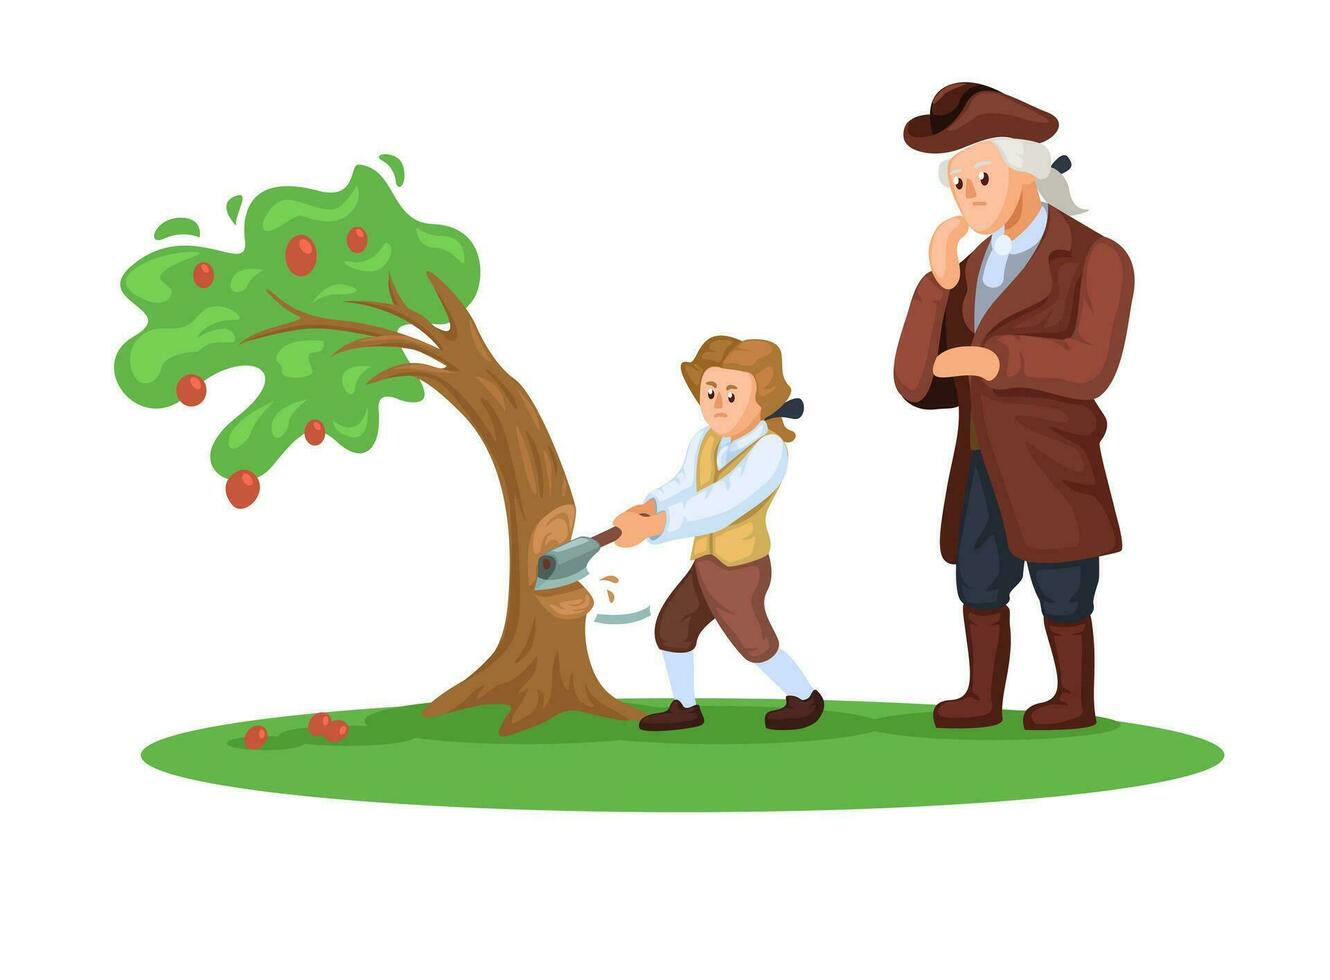 George Washington Cutting Cherry Trees With His Father. First President Of The United States America Iconic Story Scene illustration Vector